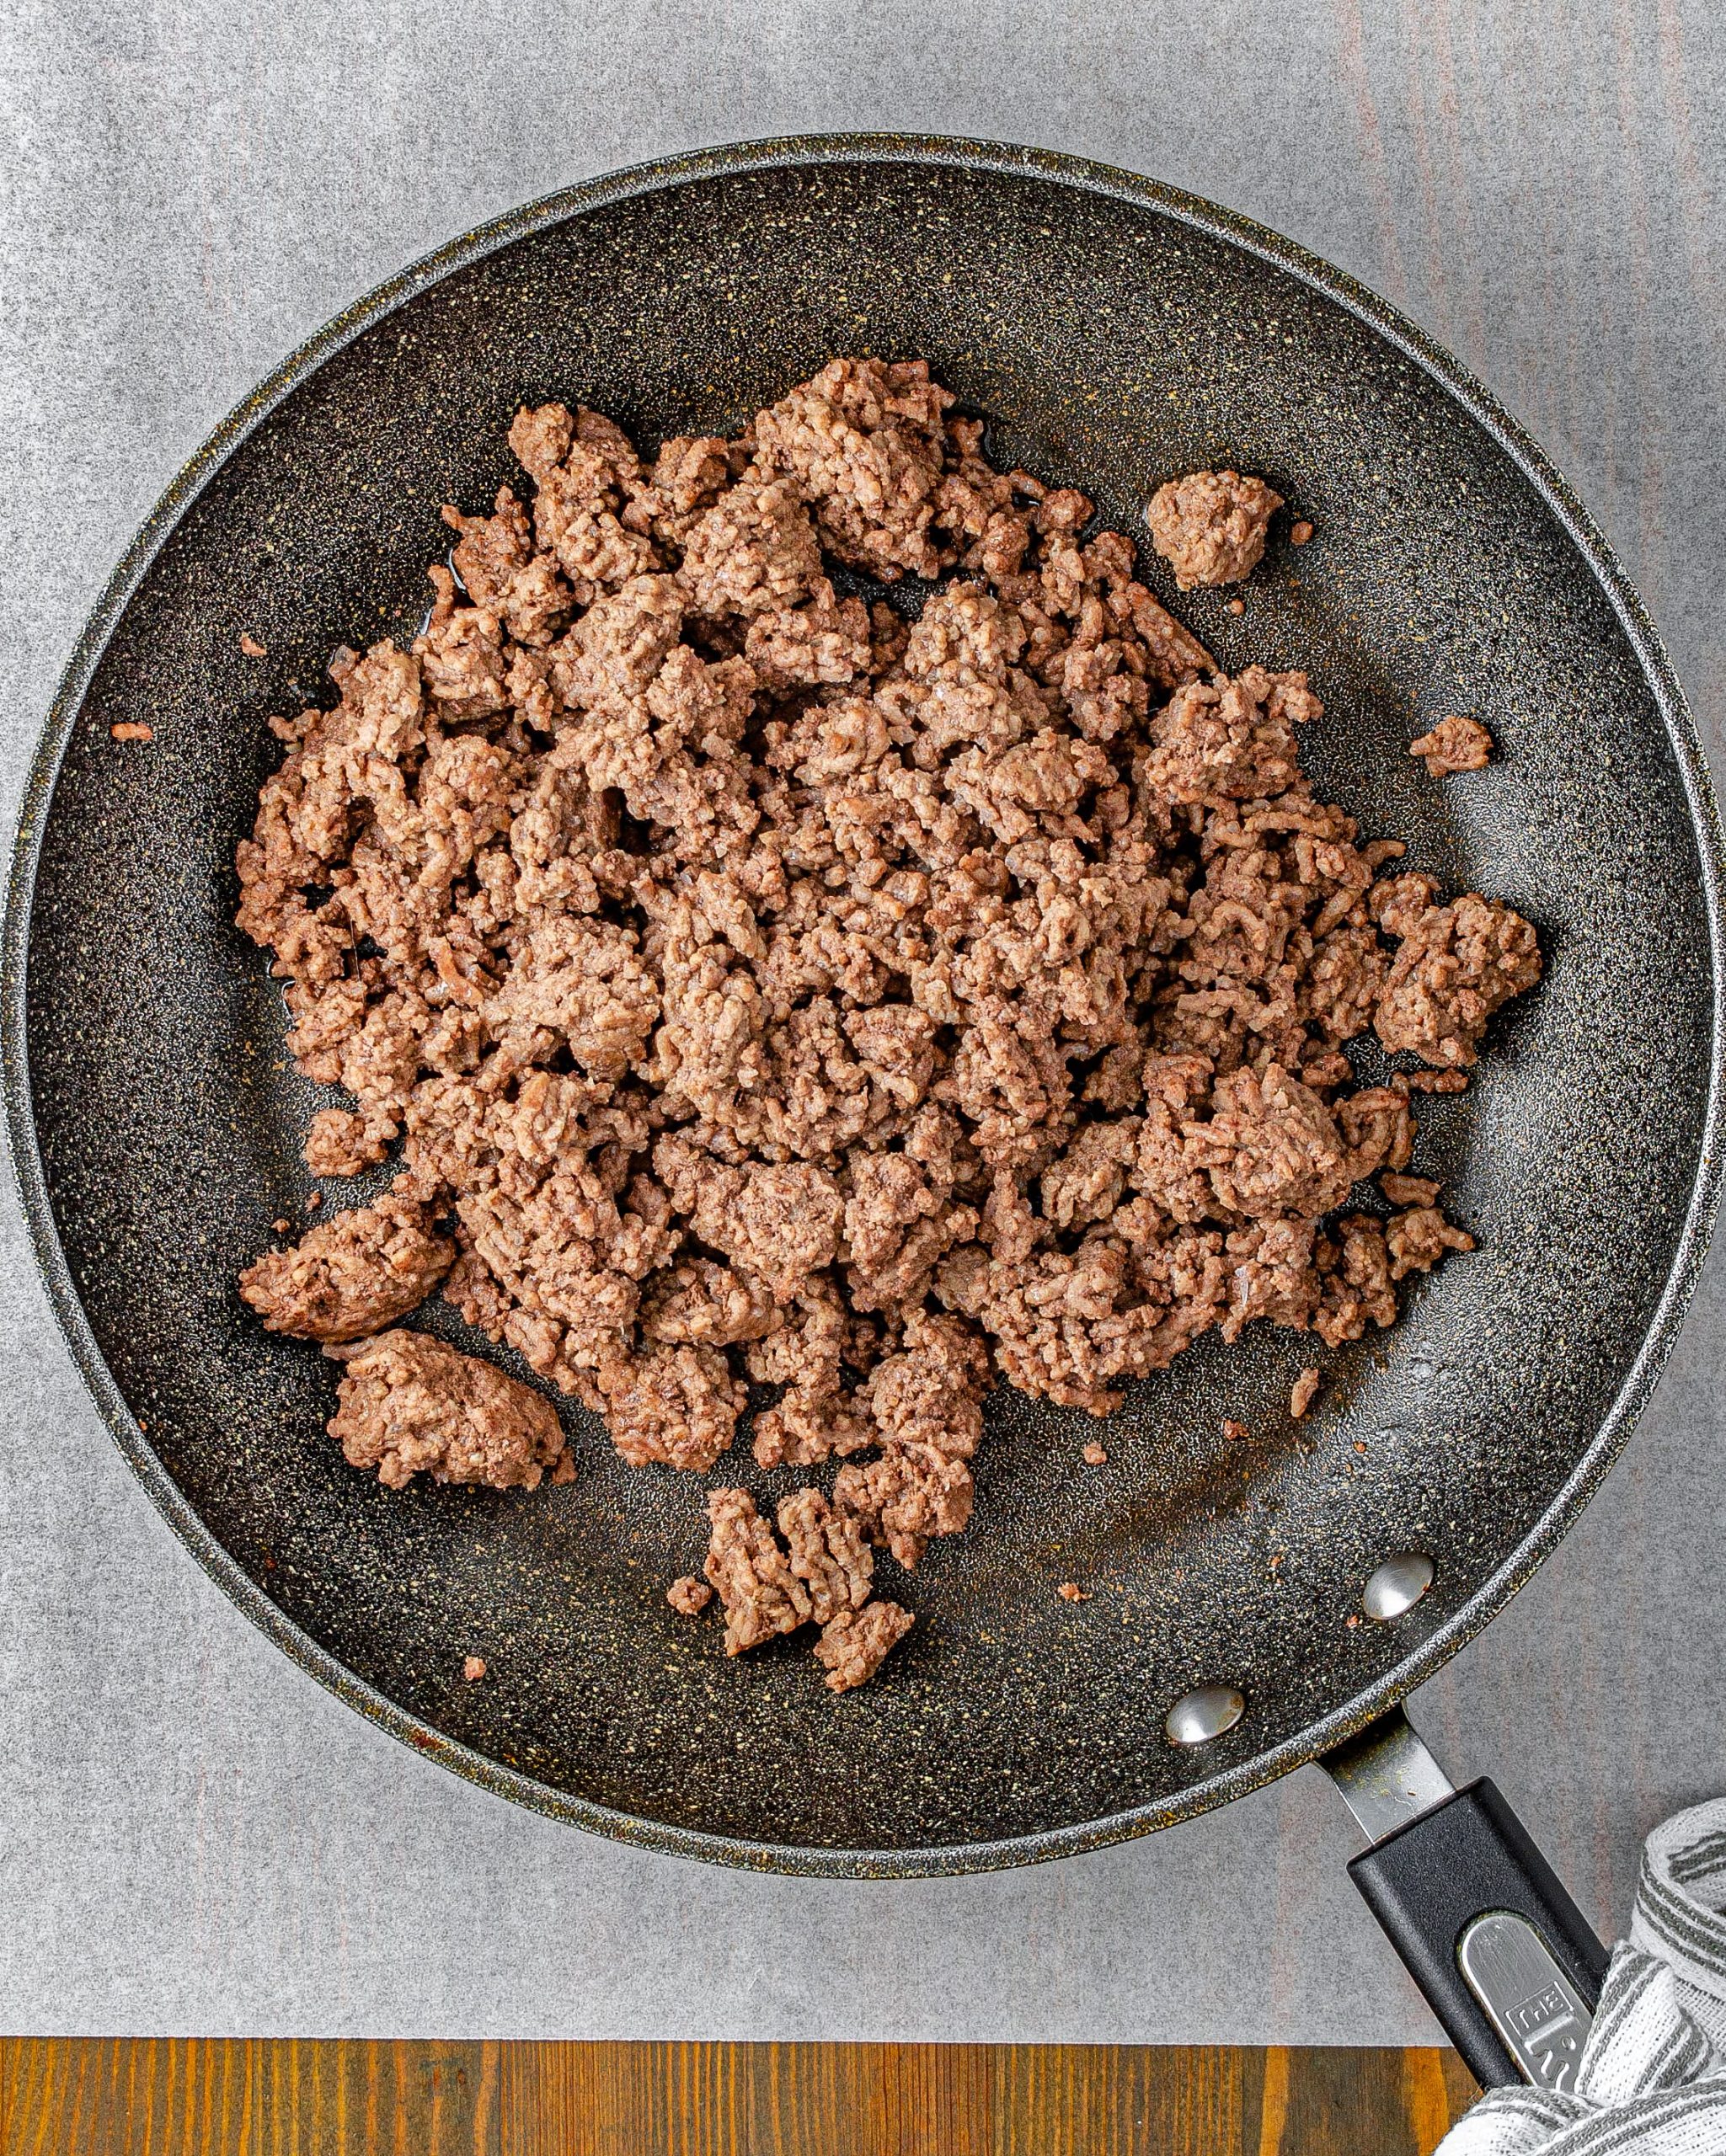 Heat the ground beef and onion in a skillet over medium-high heat on the stove. Cook until the meat is completely browned and the onions have softened.